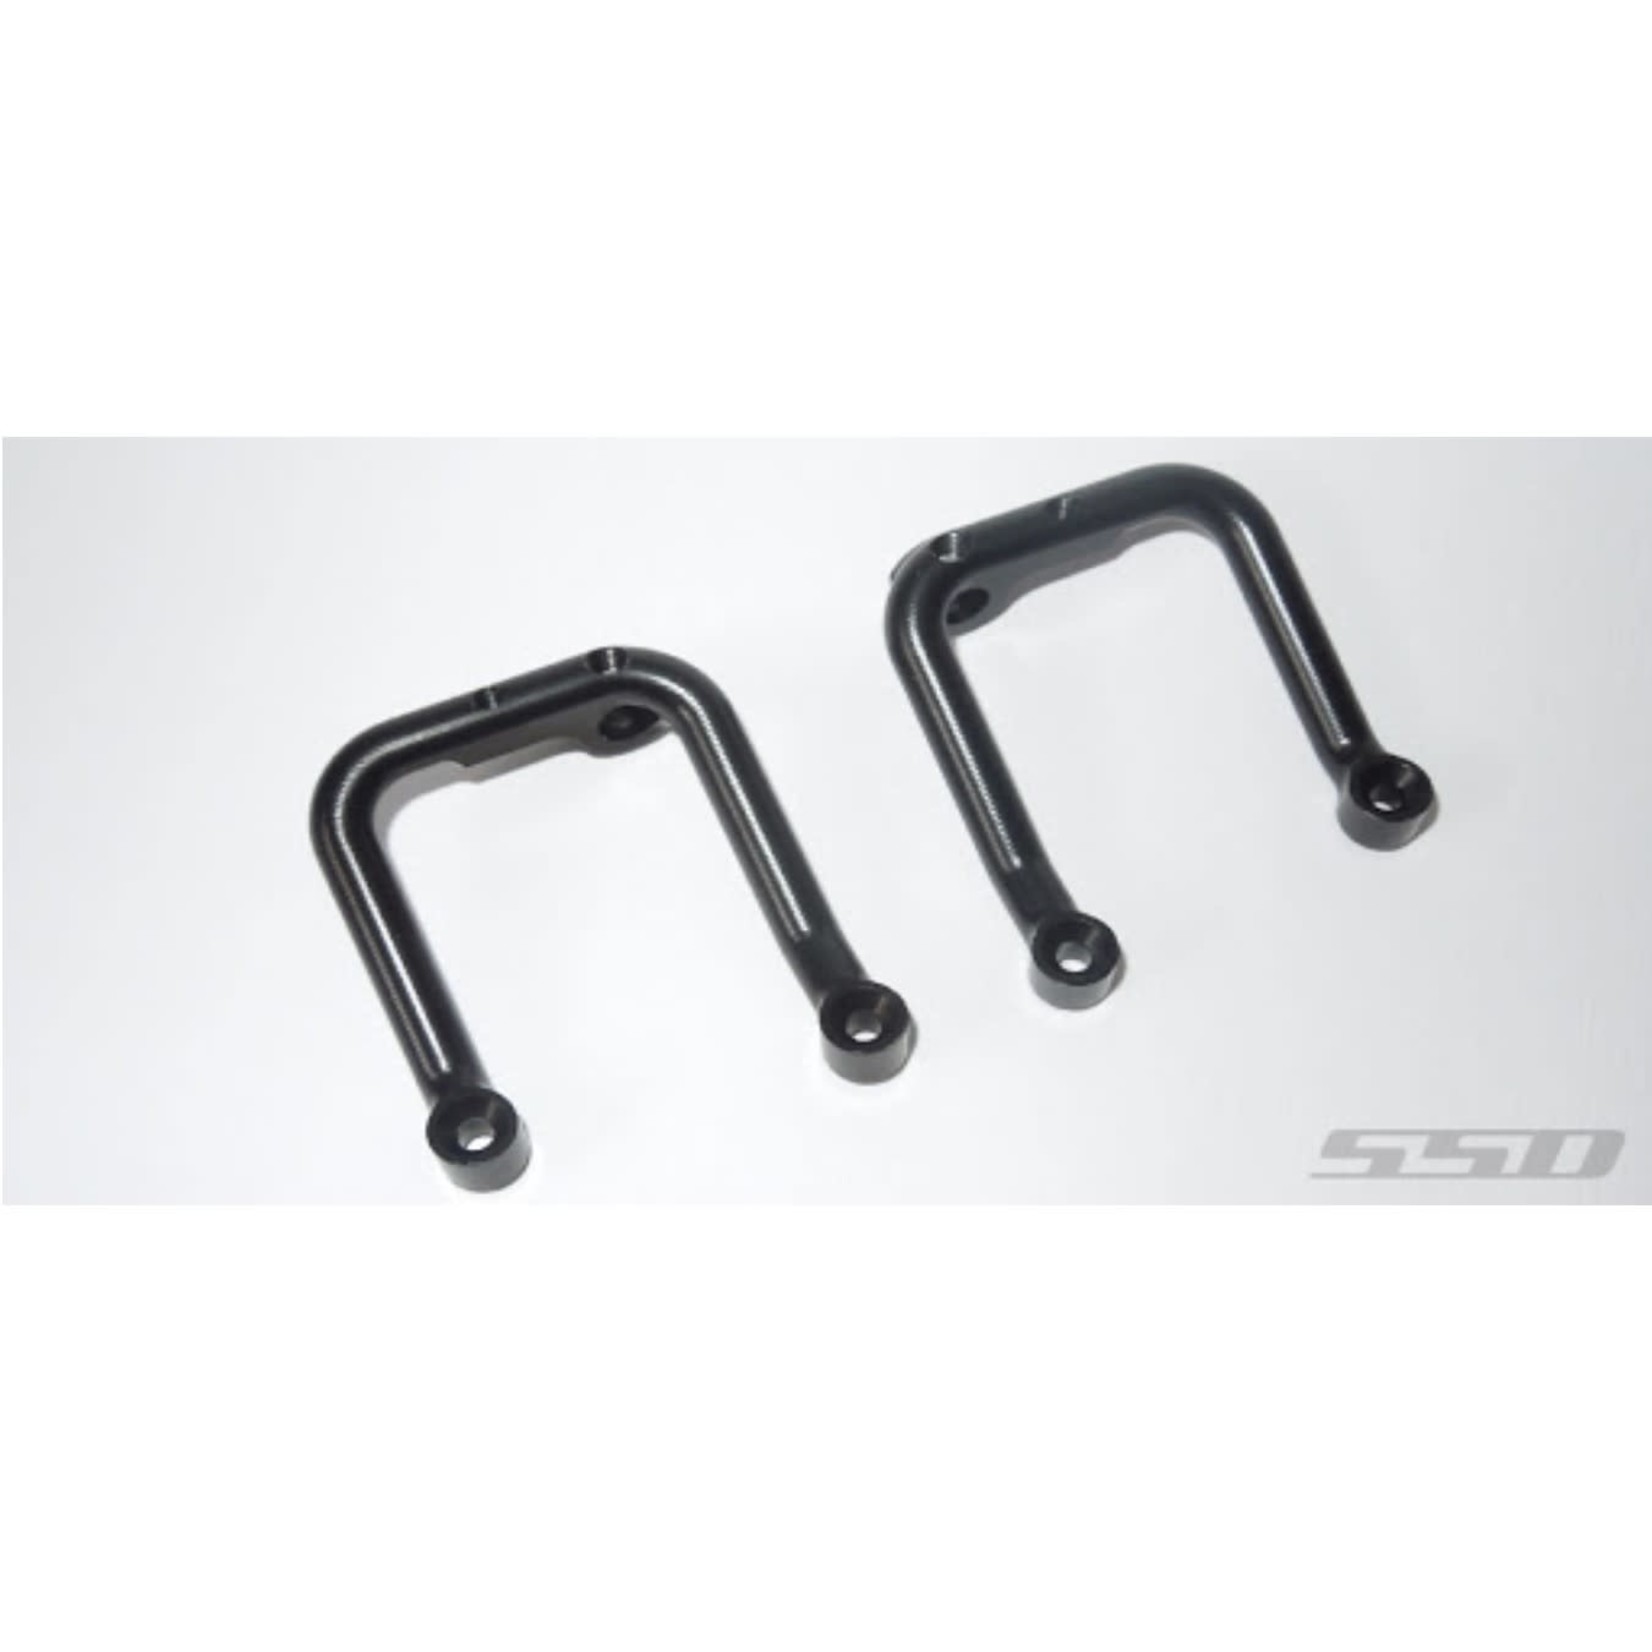 SSD RC Trail King Aluminum Front Shock Hoops